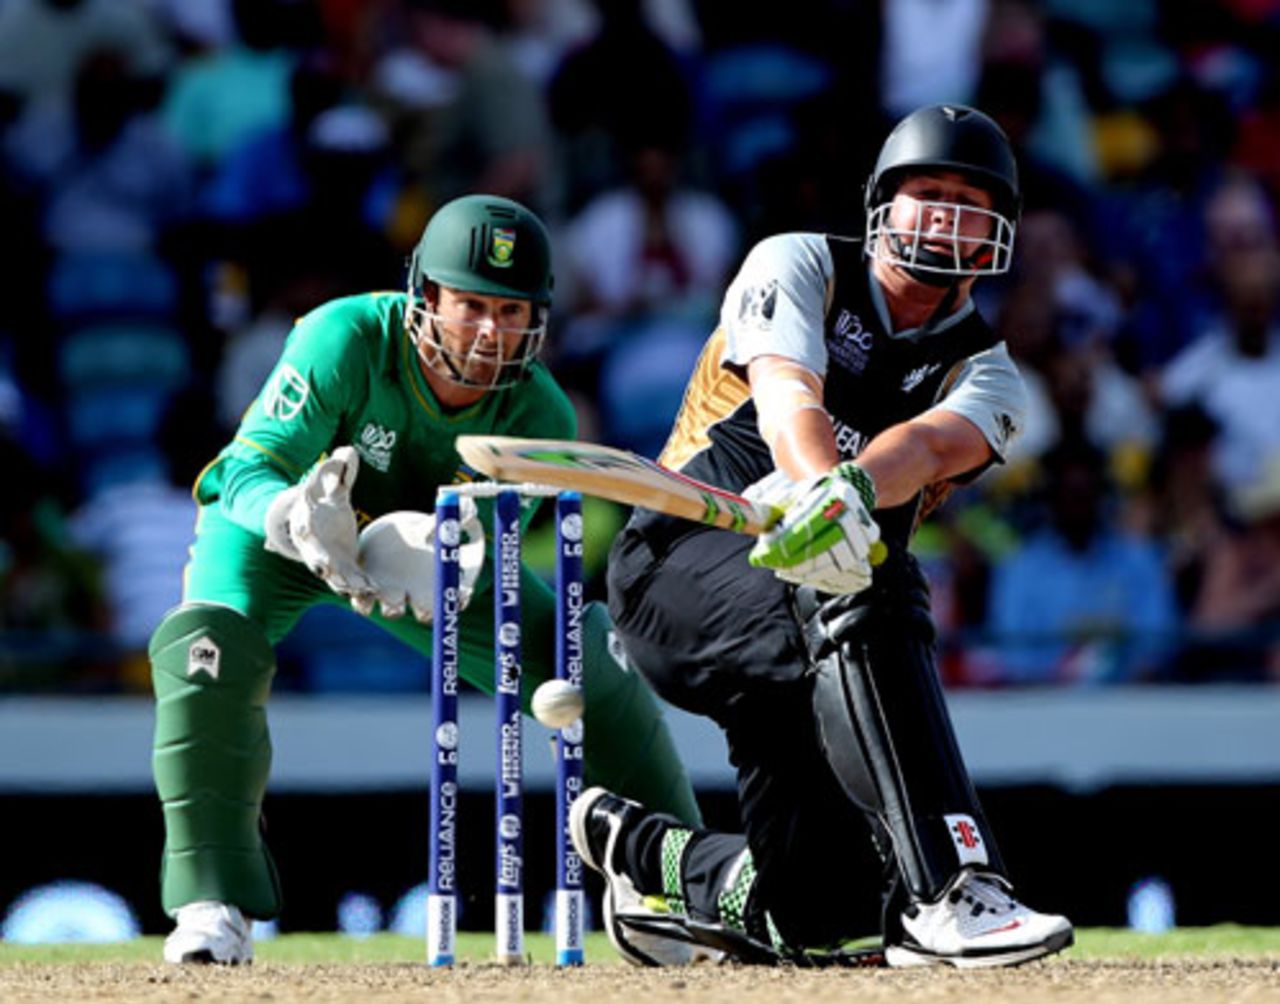 Jesse Ryder sweeps as Mark Boucher looks on, New Zealand v South Africa, Group E, Bridgetown, May 6, 2010

